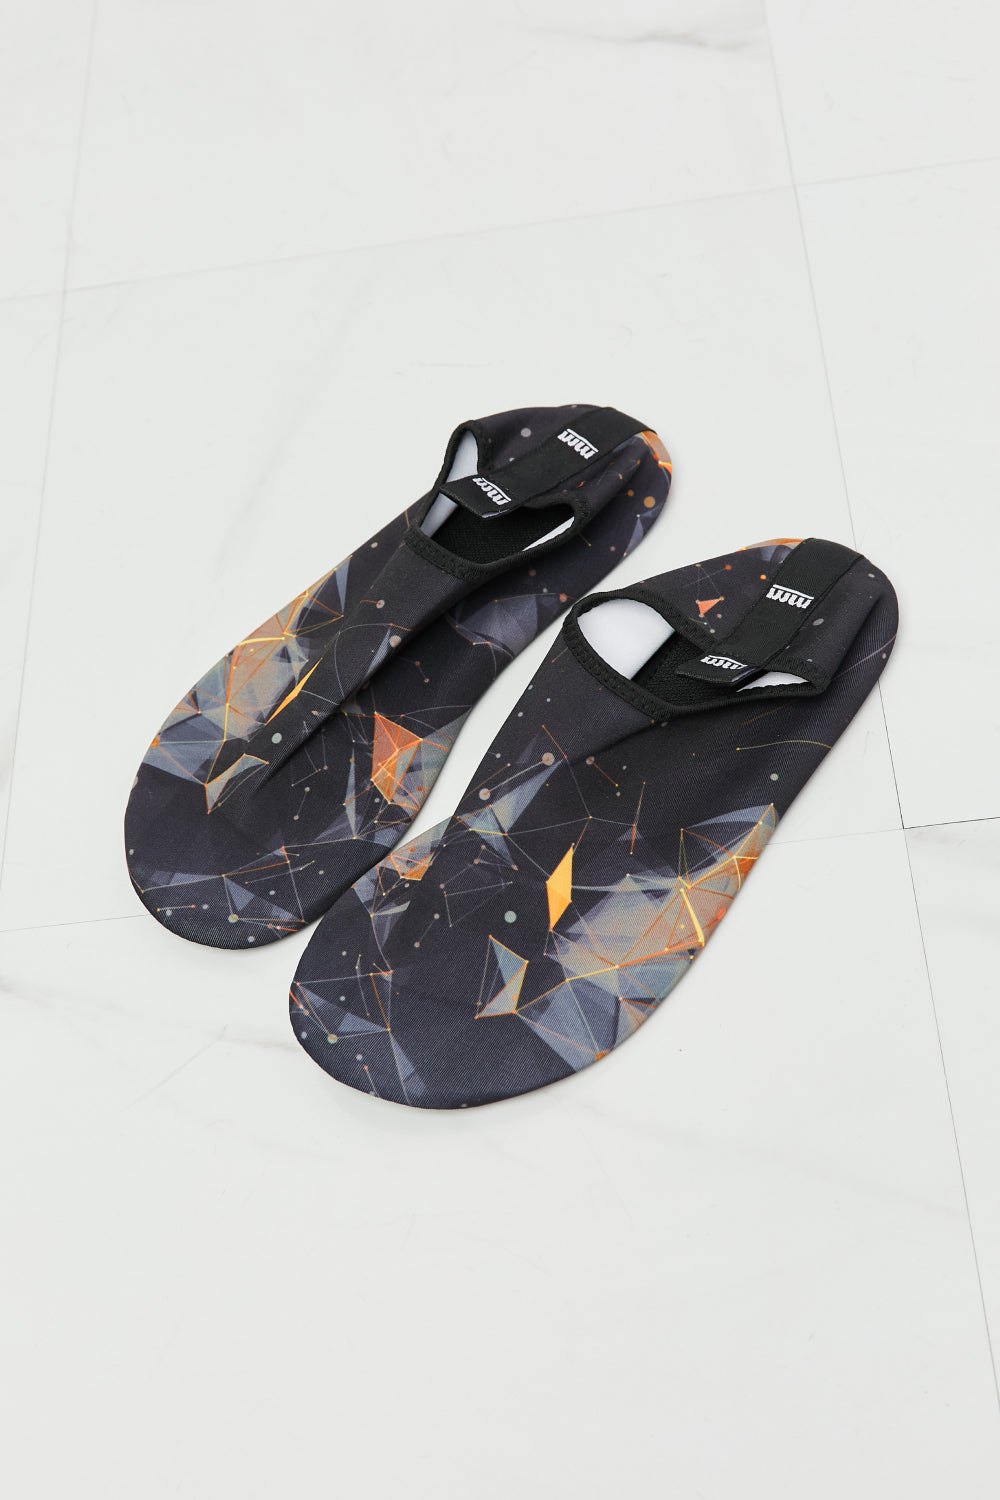 MMshoes On The Shore Water Shoes in Black/Orange Print on any thing USA/STOD clothes